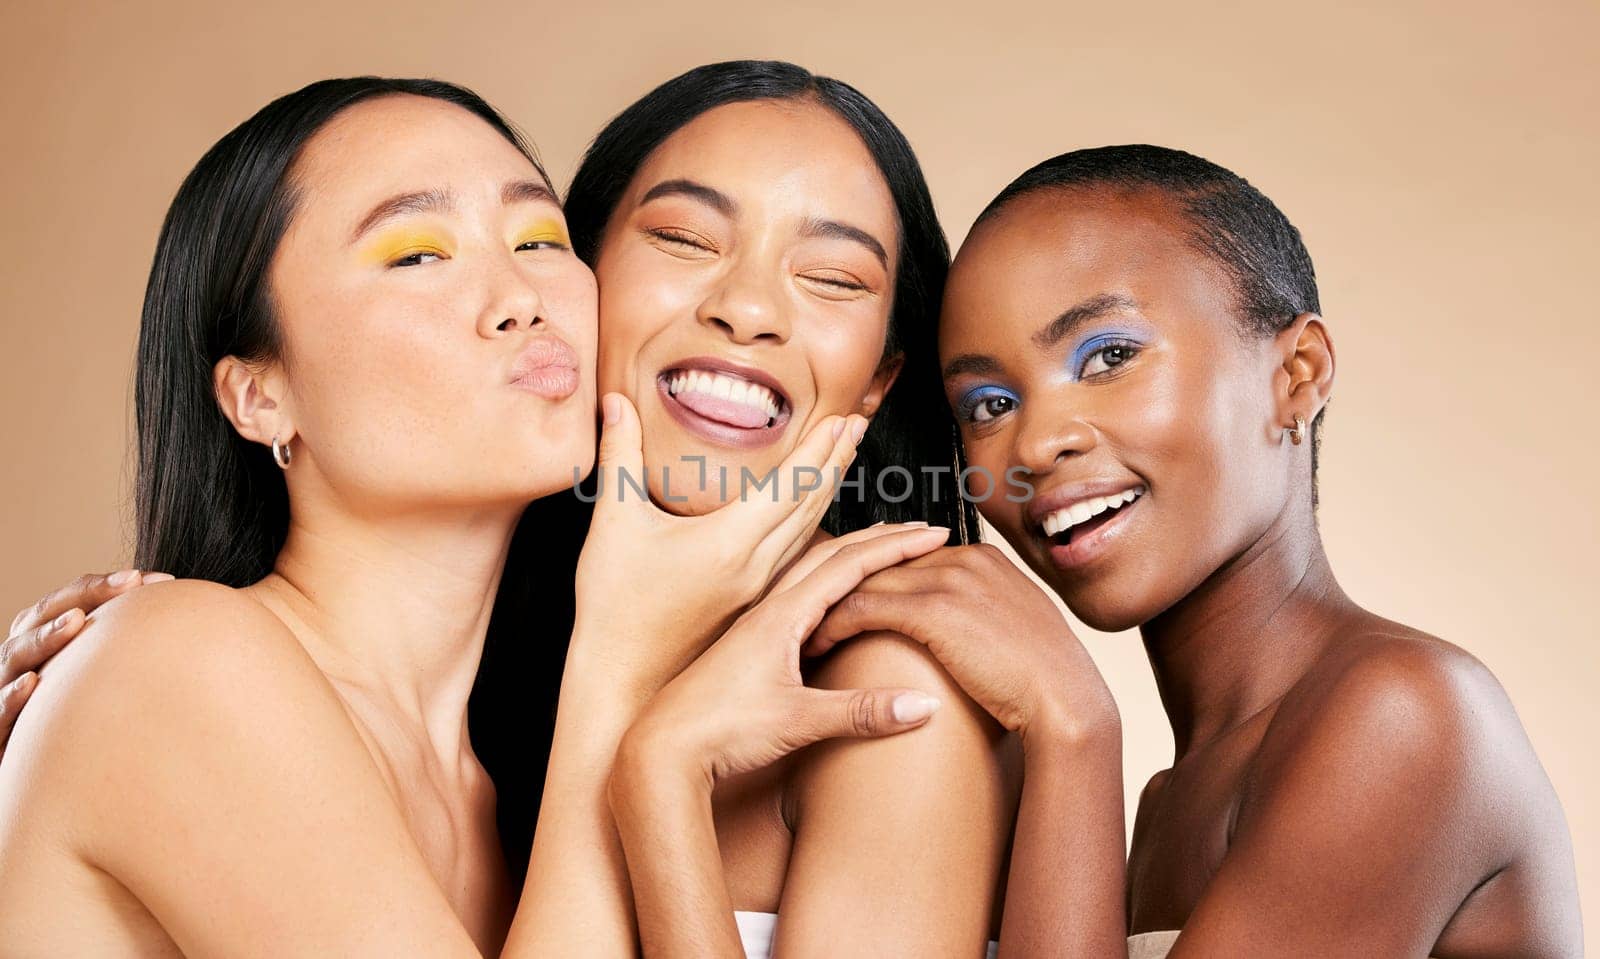 Happy women, portrait smile and face in beauty for skincare, cosmetics or makeup against a studio background. People, friends or models smiling in happiness or satisfaction for fun healthy treatment by YuriArcurs